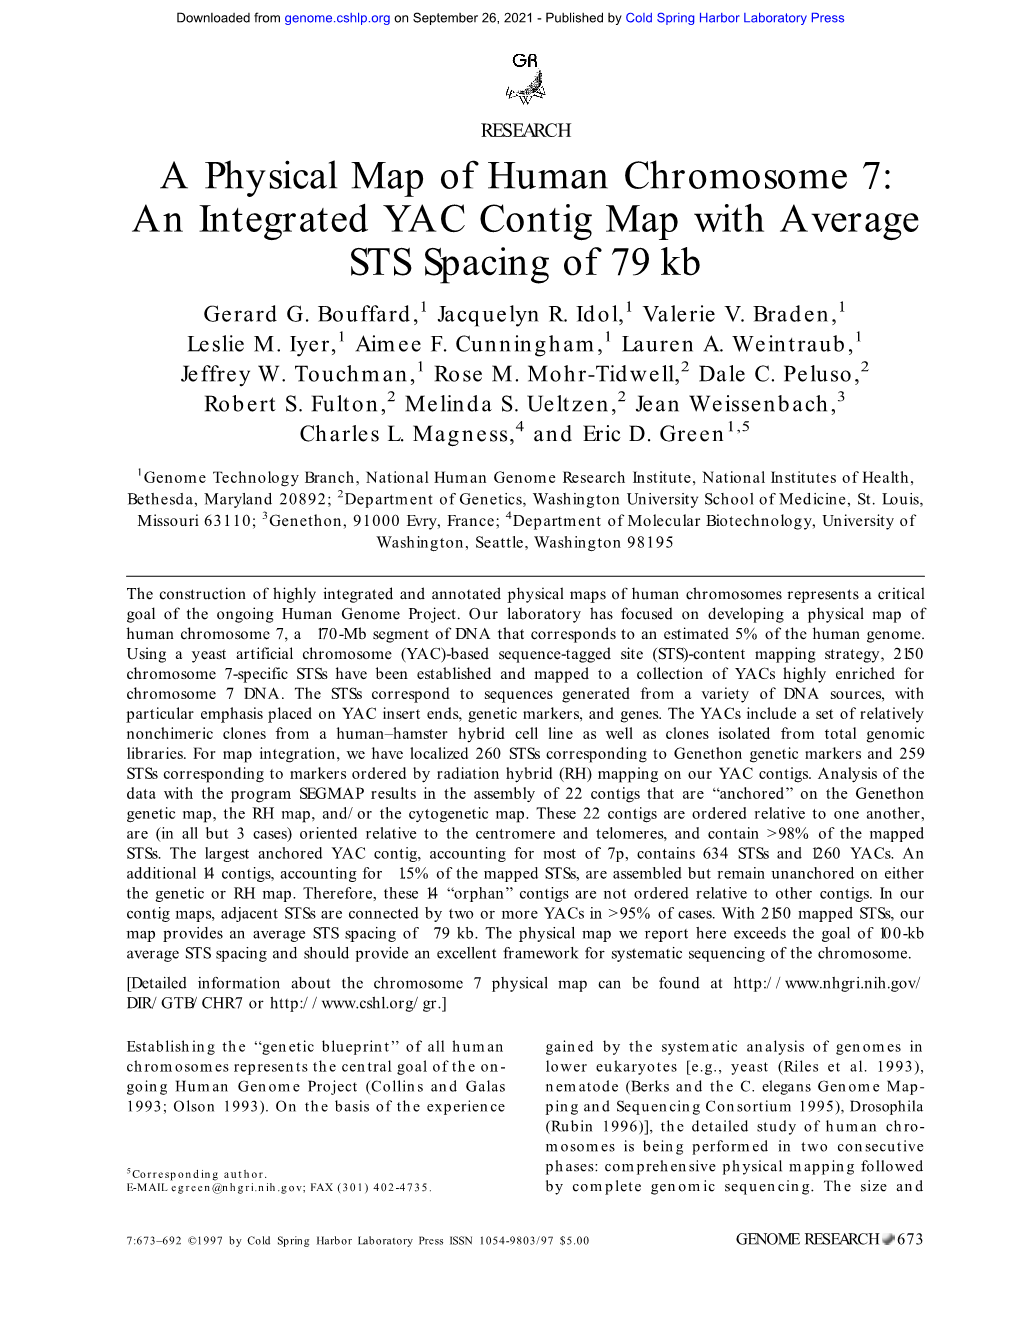 A Physical Map of Human Chromosome 7: an Integrated YAC Contig Map with Average STS Spacing of 79 Kb Gerard G